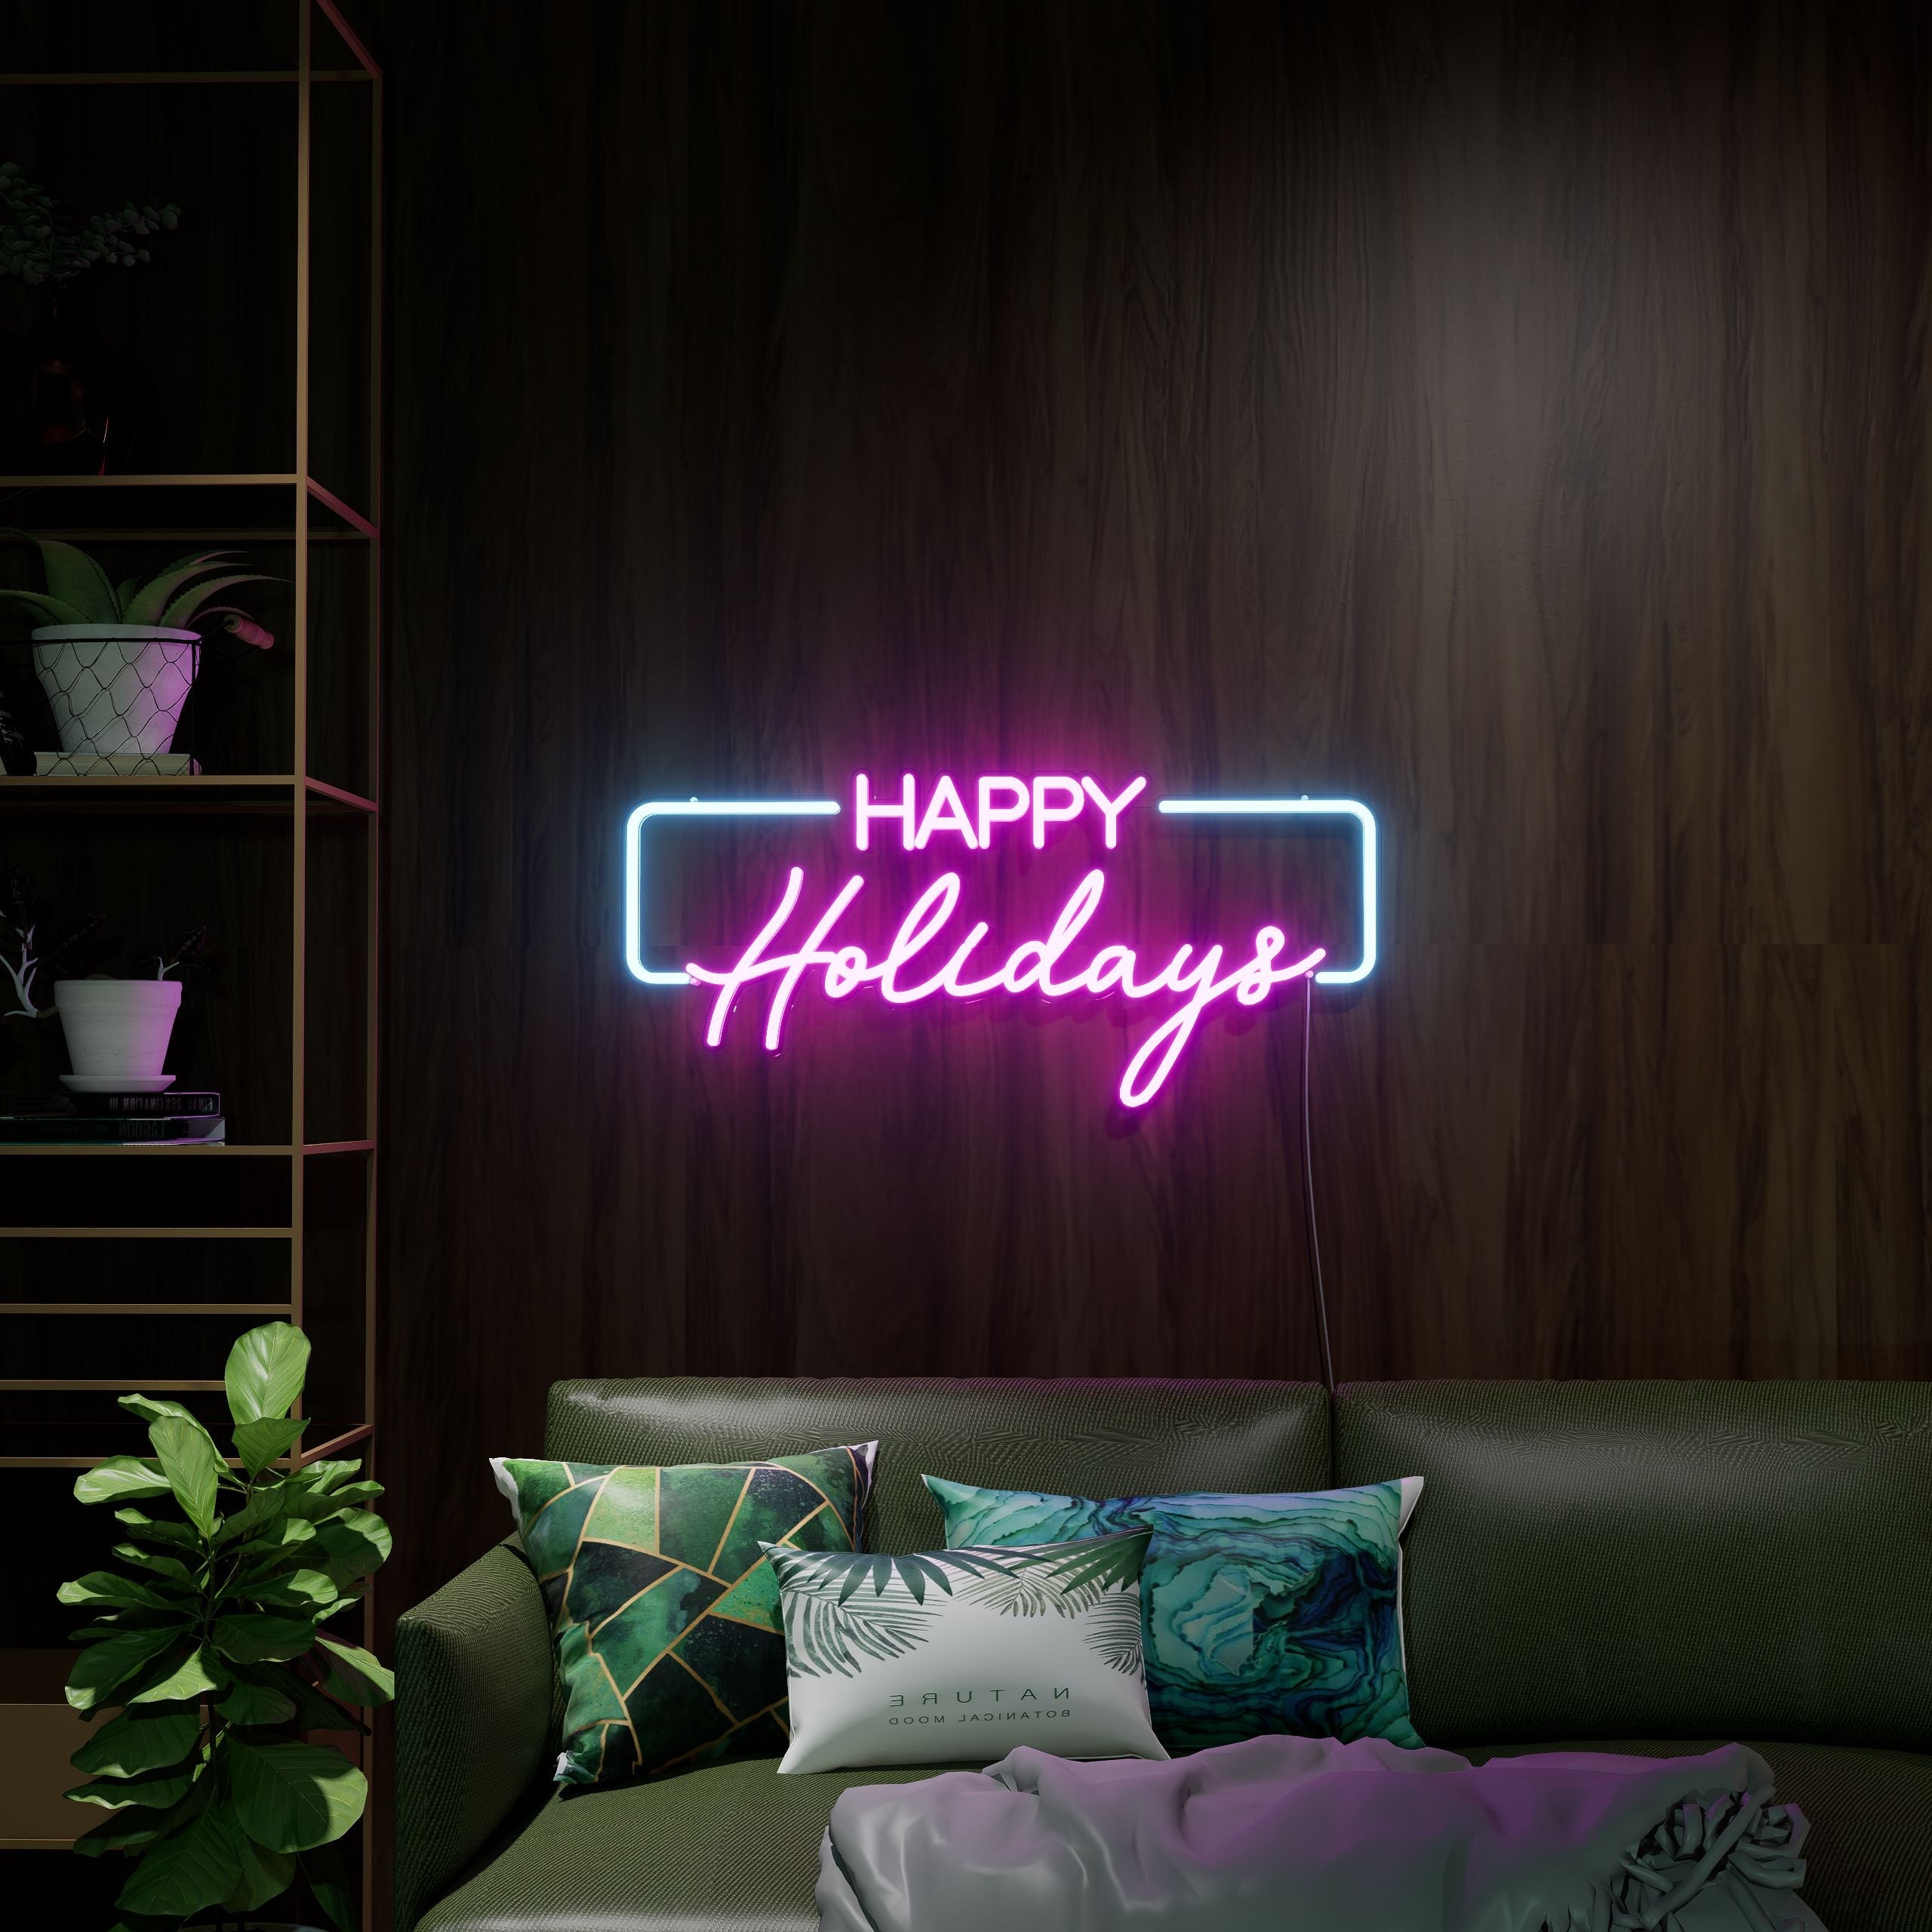 cheerful-holiday-wishes-neon-sign-lite